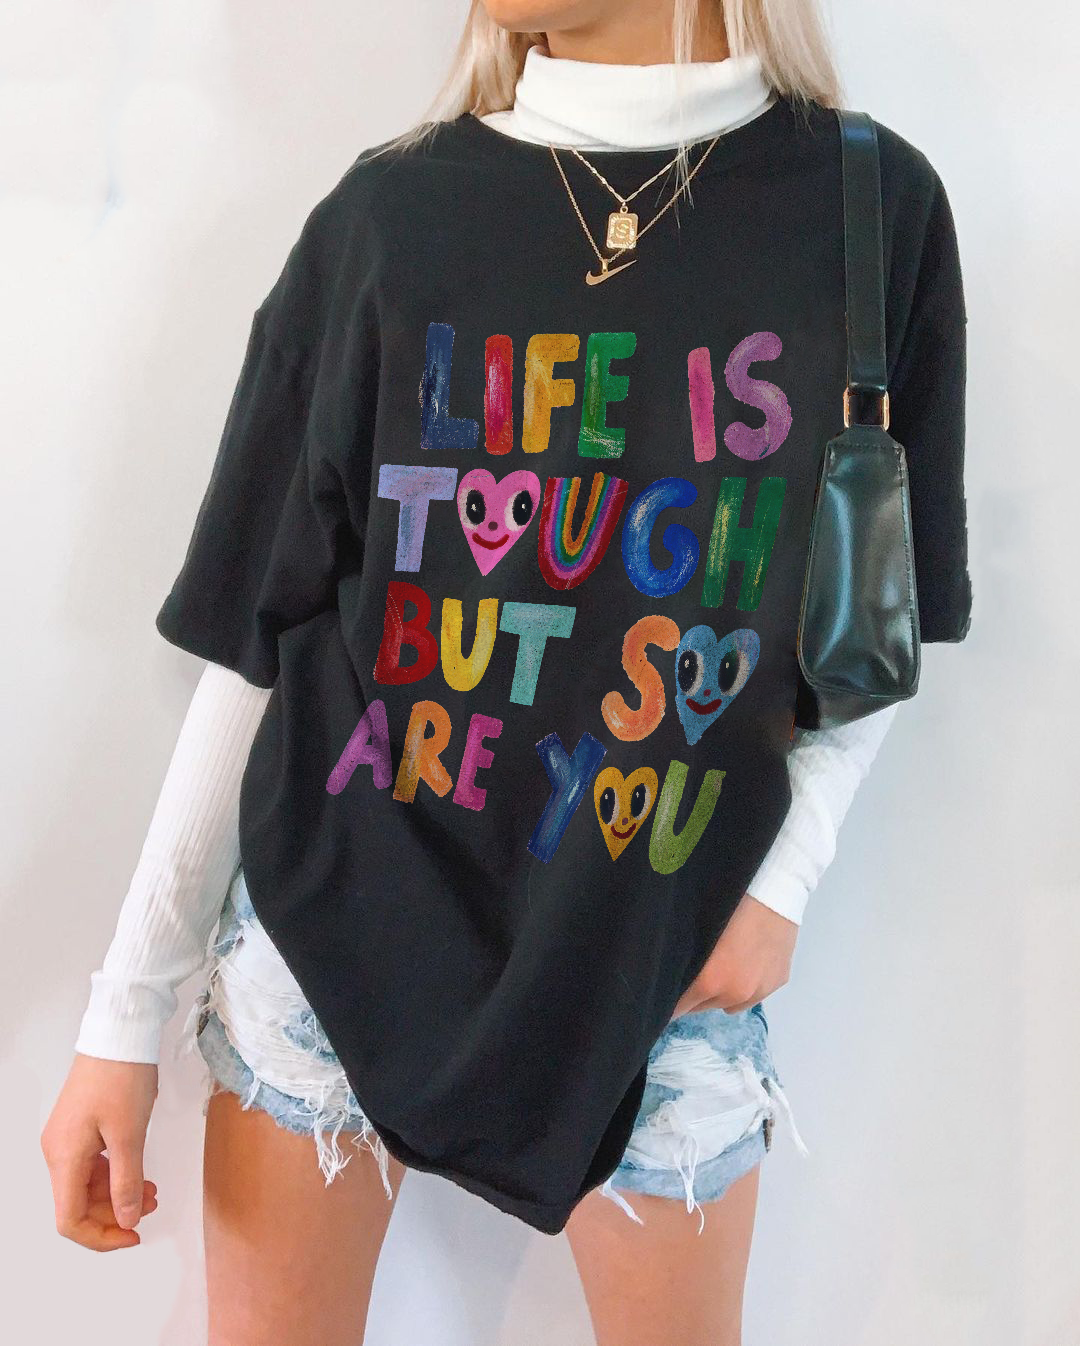 Life is so tough but so are you Printed Oversized Unisex T-shirt